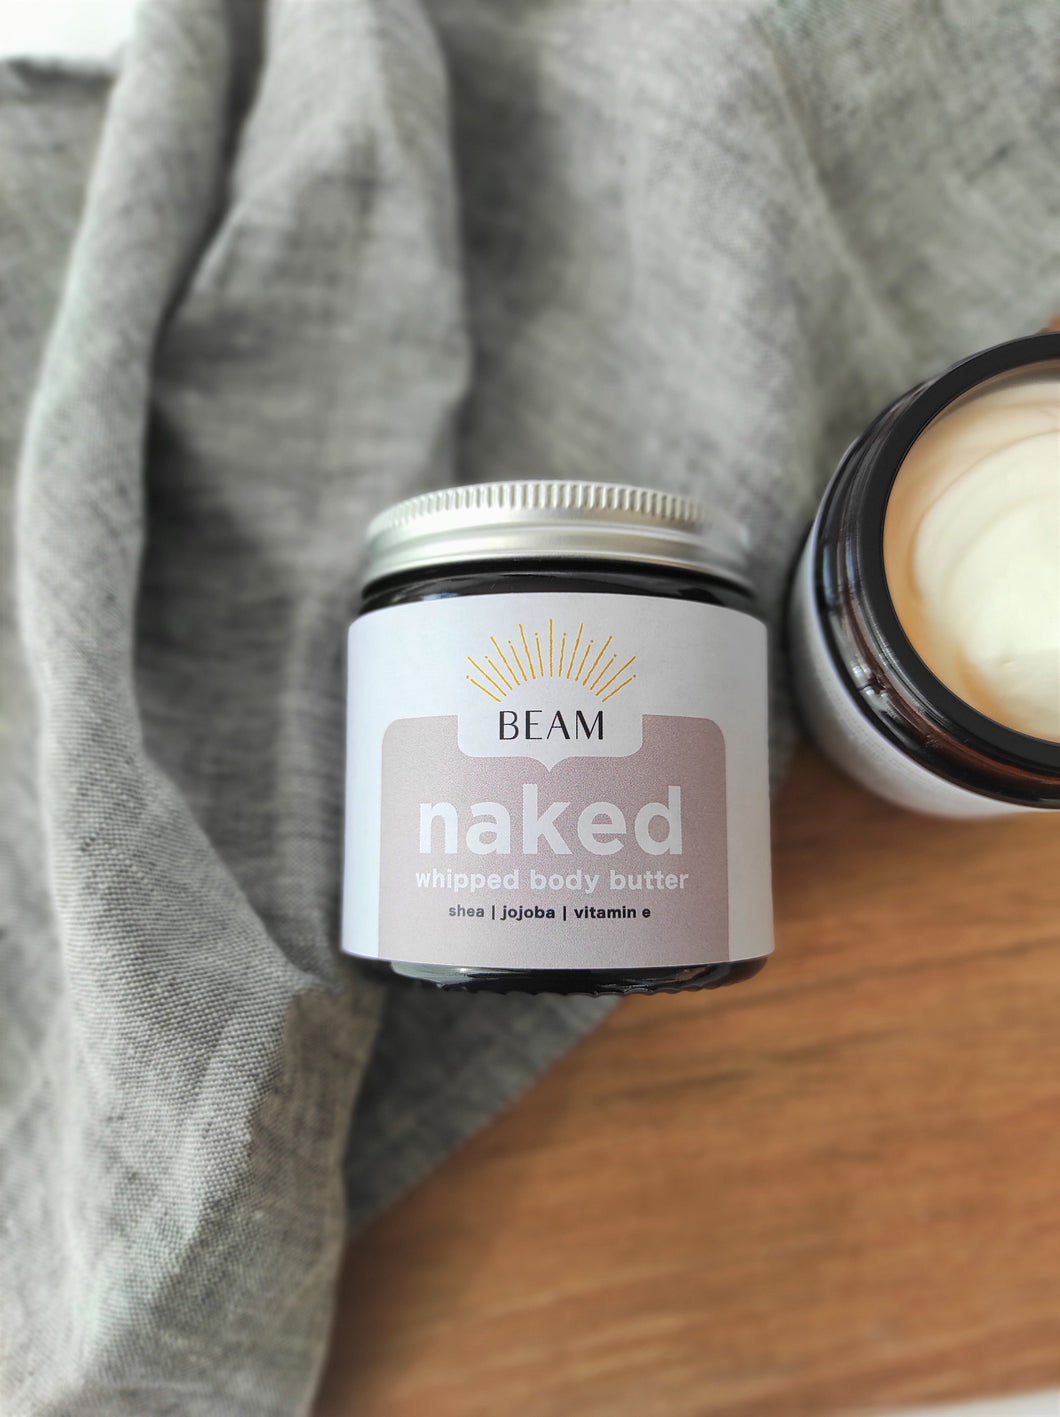 Naked whipped body butter